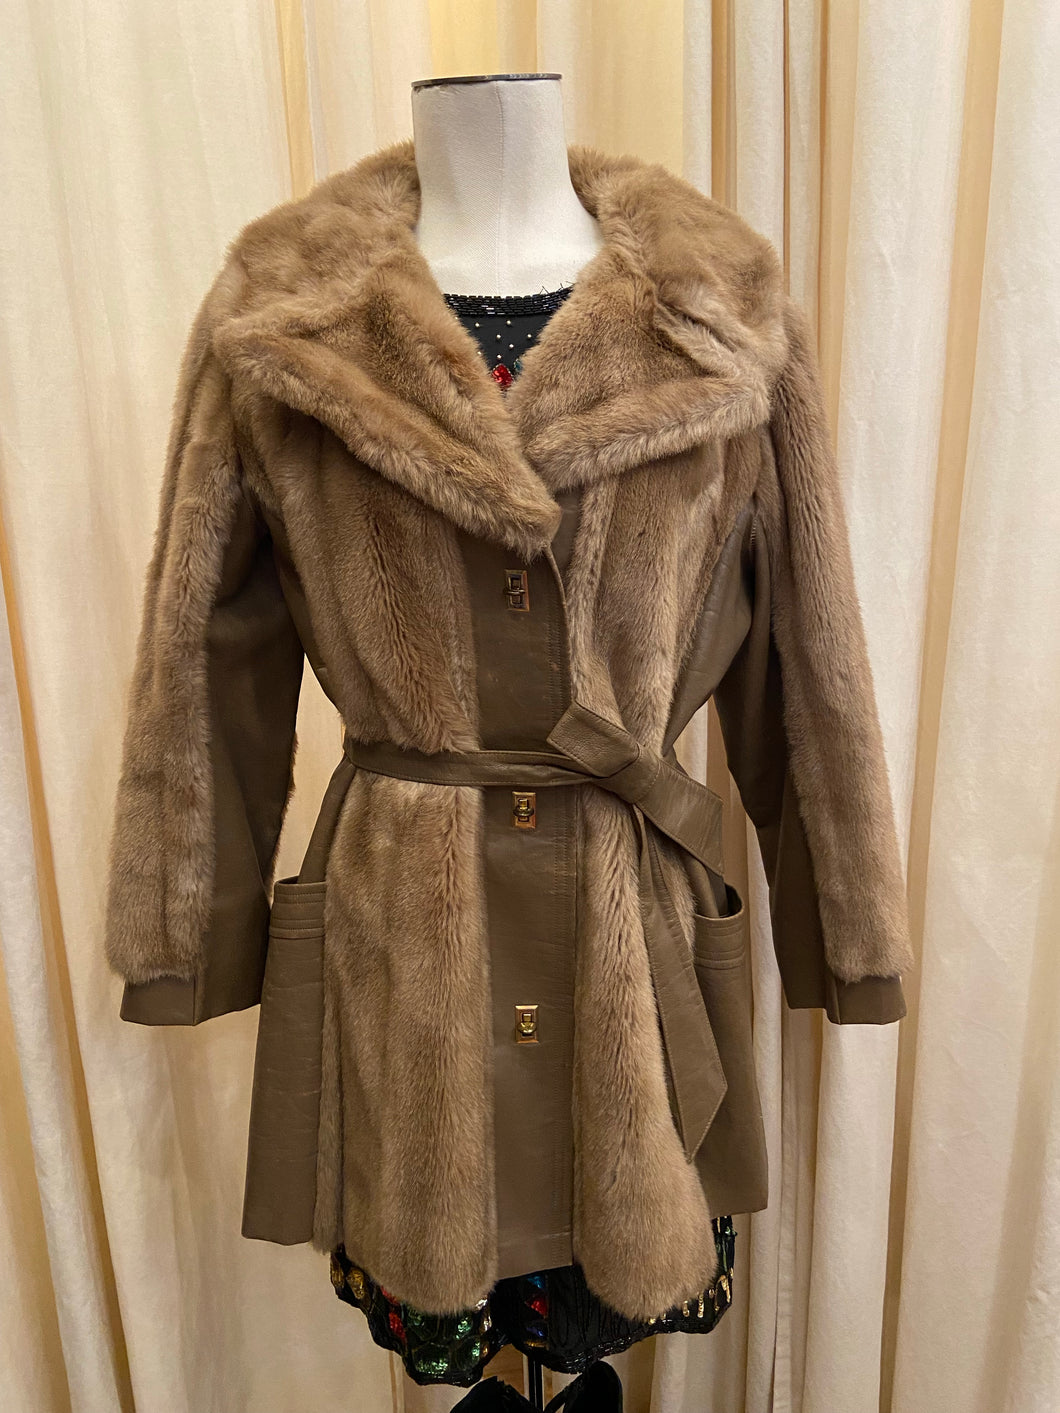 Vintage genuine leather and faux fur coat